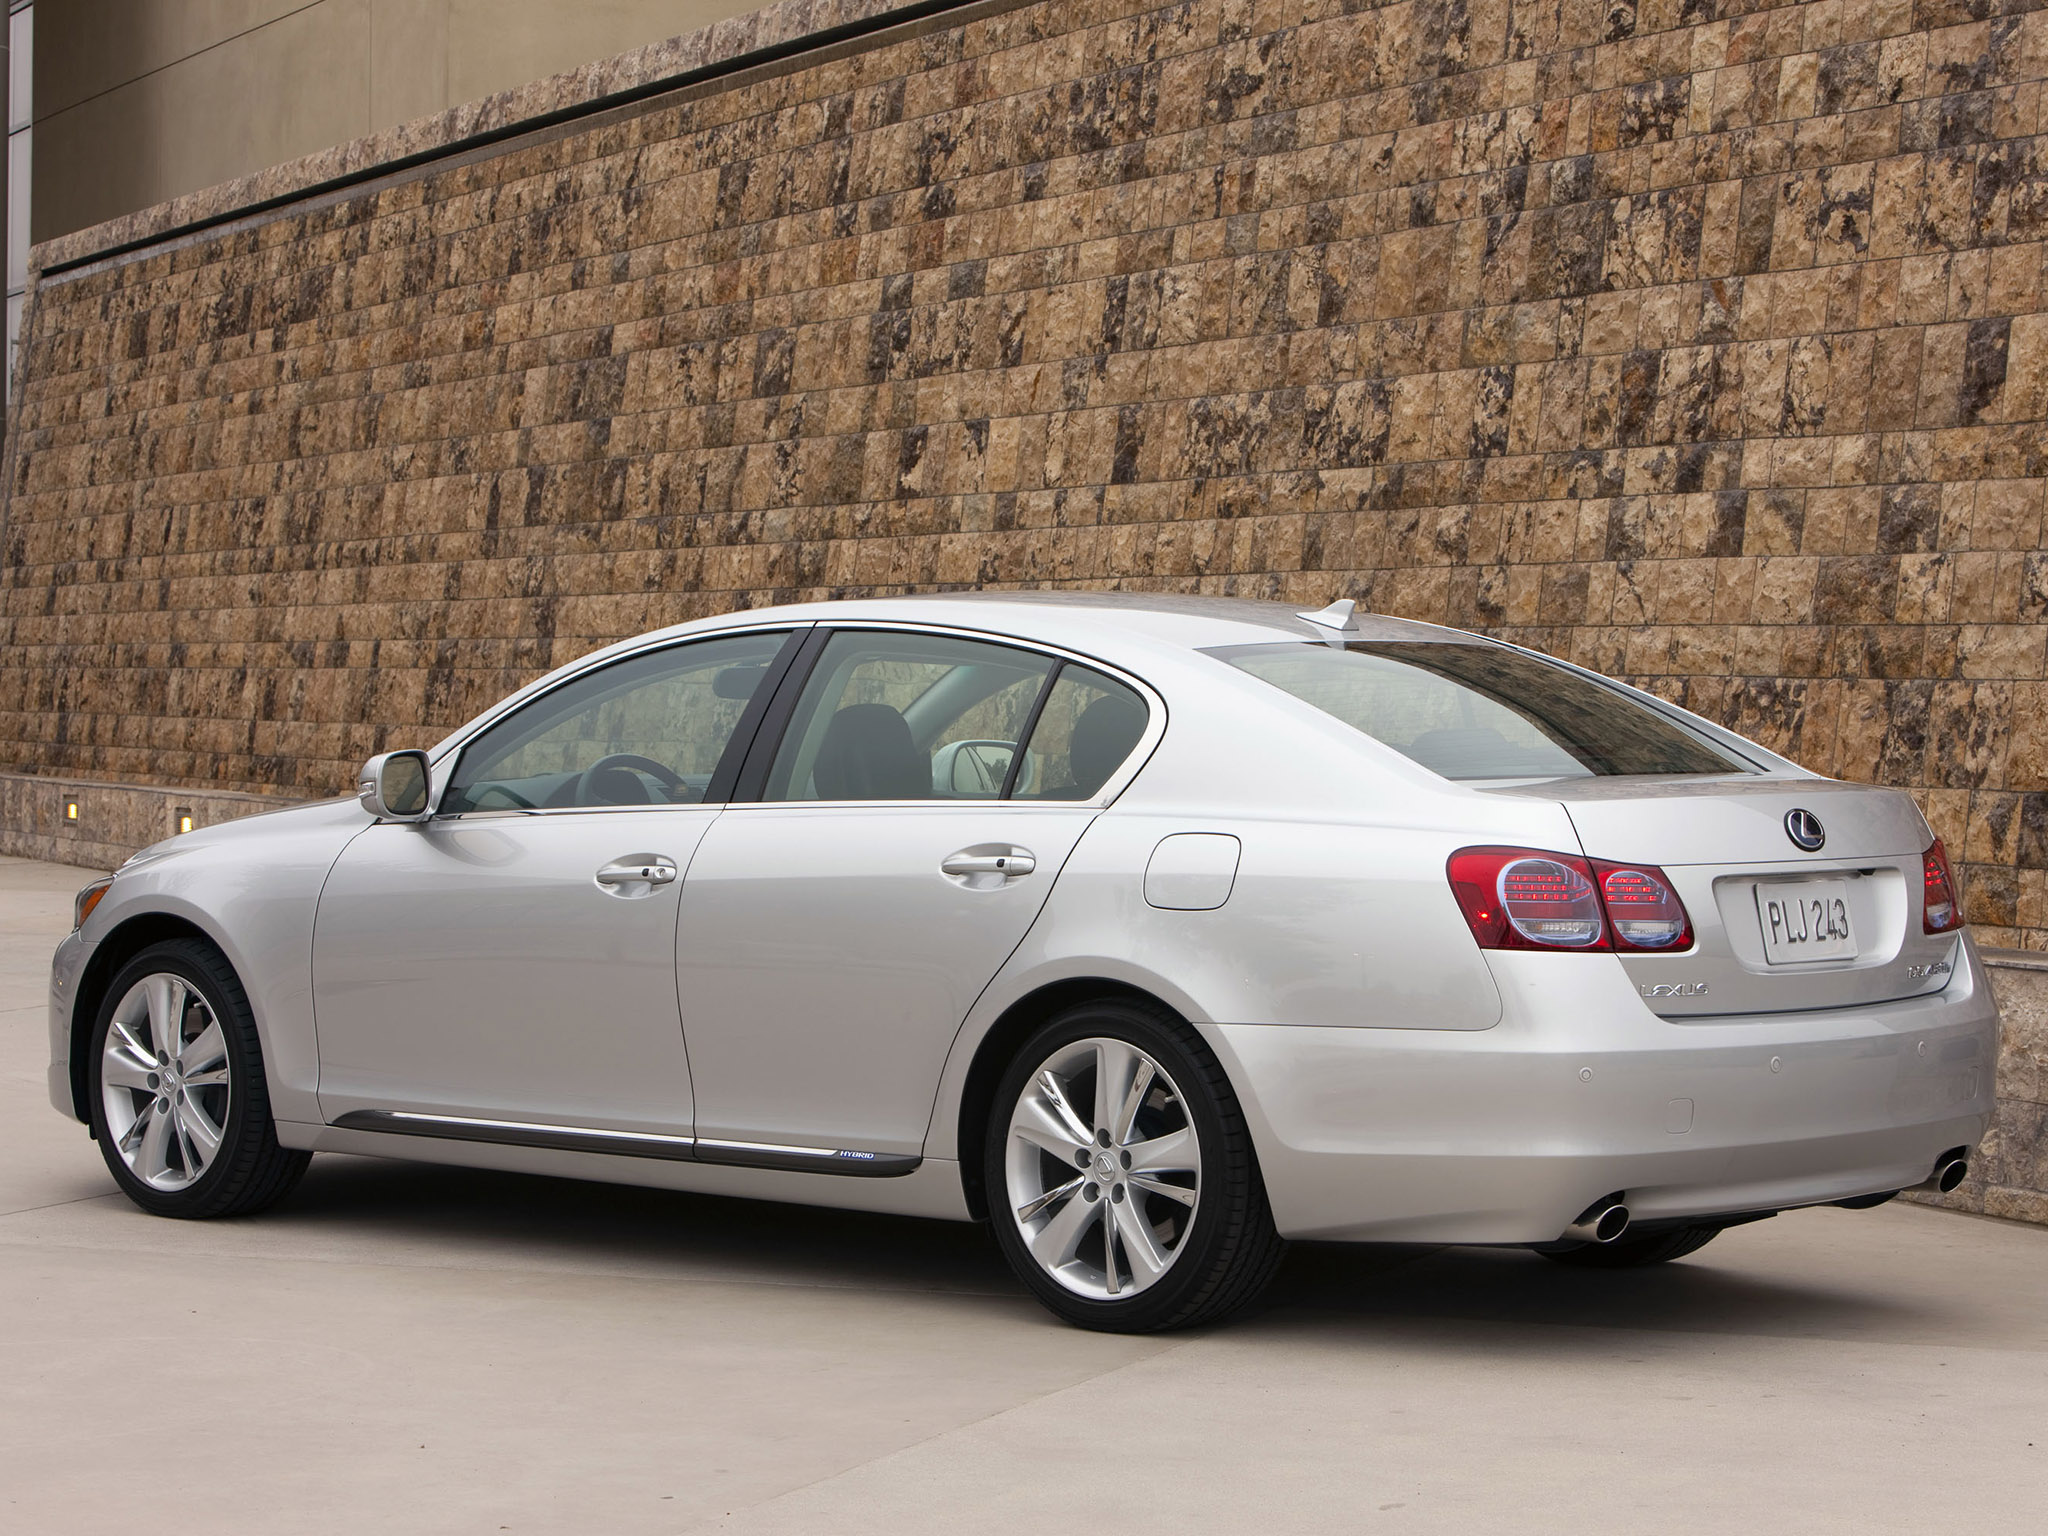 Car in pictures car photo gallery » Lexus GS 450h 2009